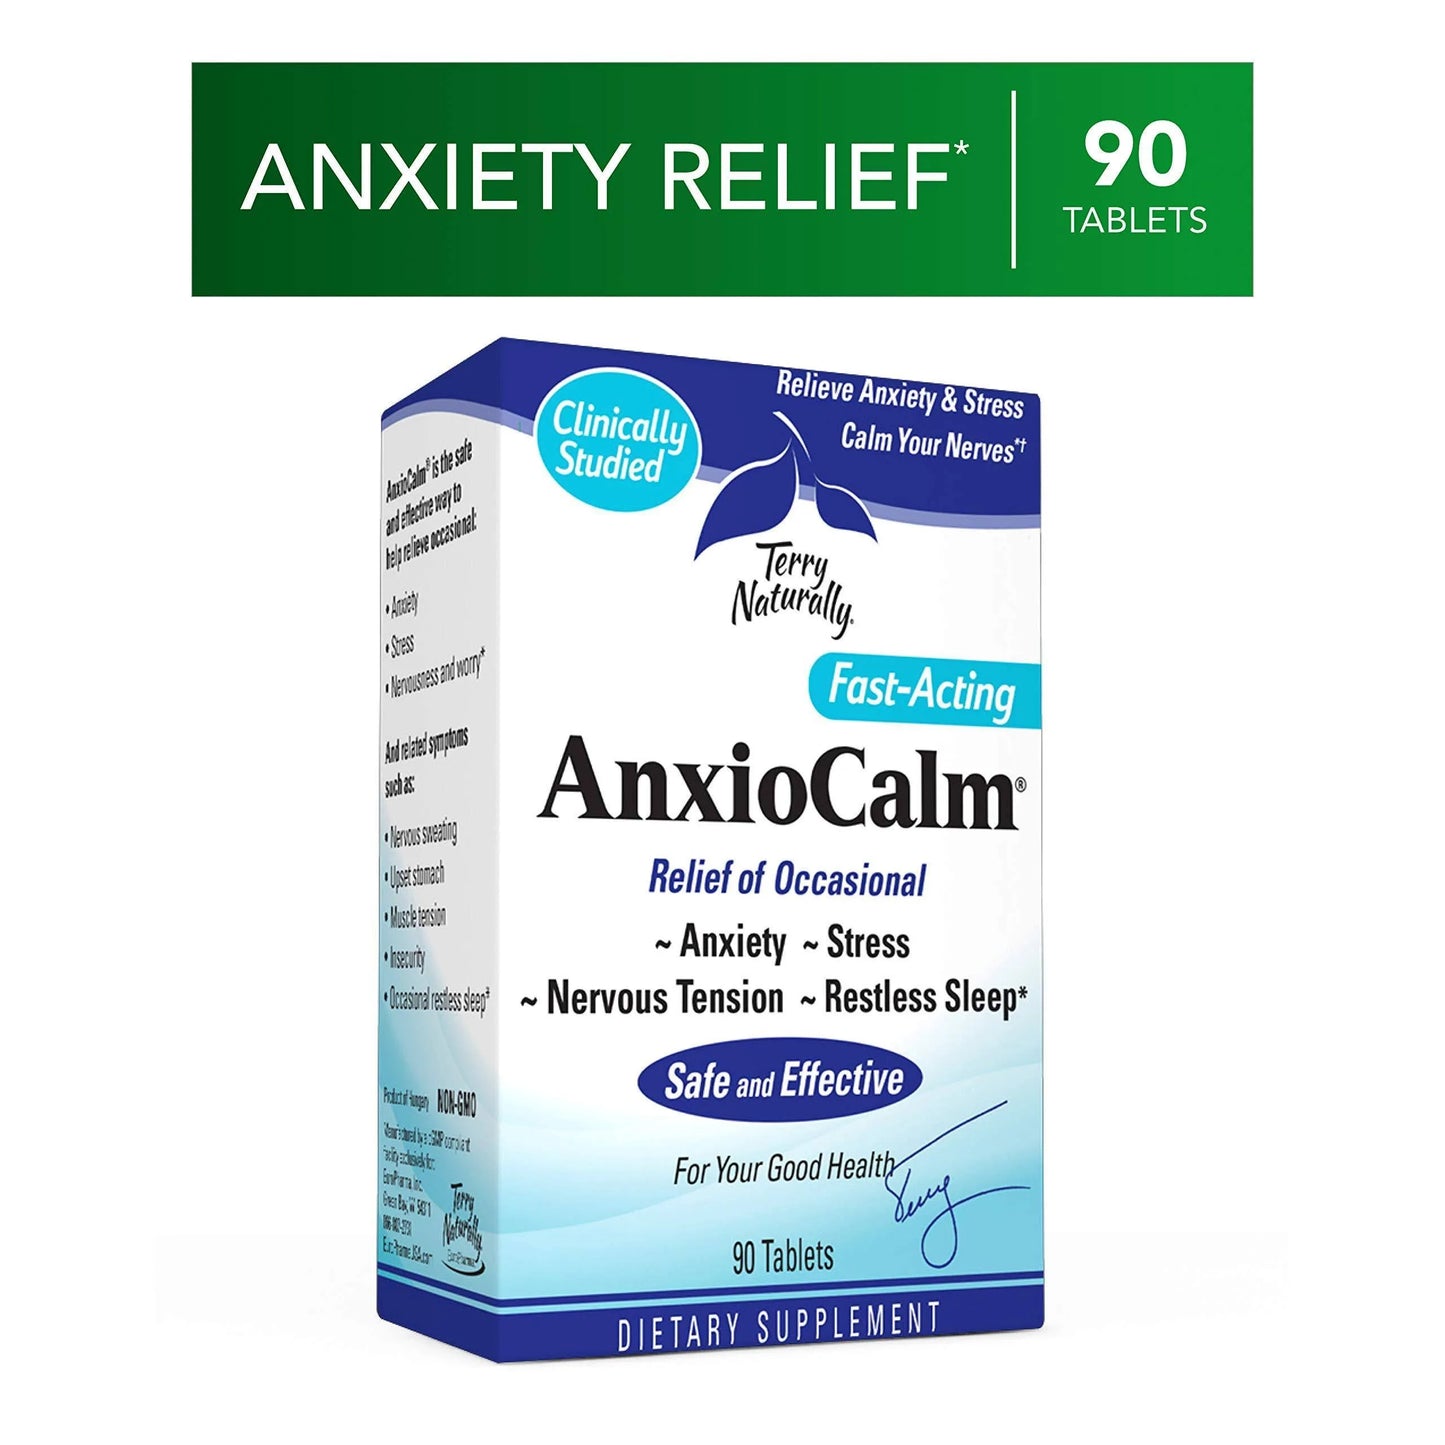 terry naturally anxiocalm 90 tablets